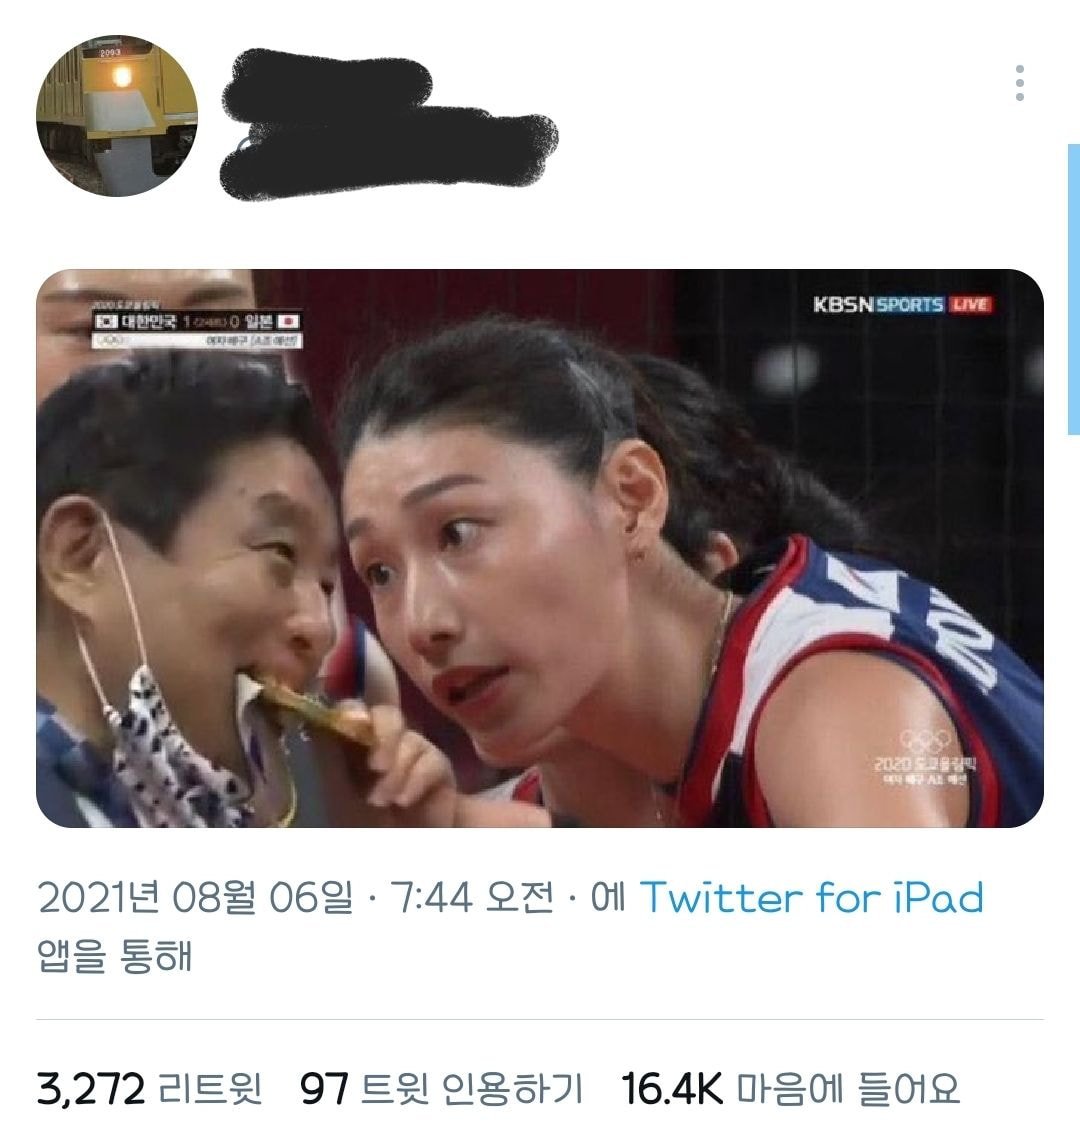 Nagoya mayor who is being criticized for biting the gold medal.jpg